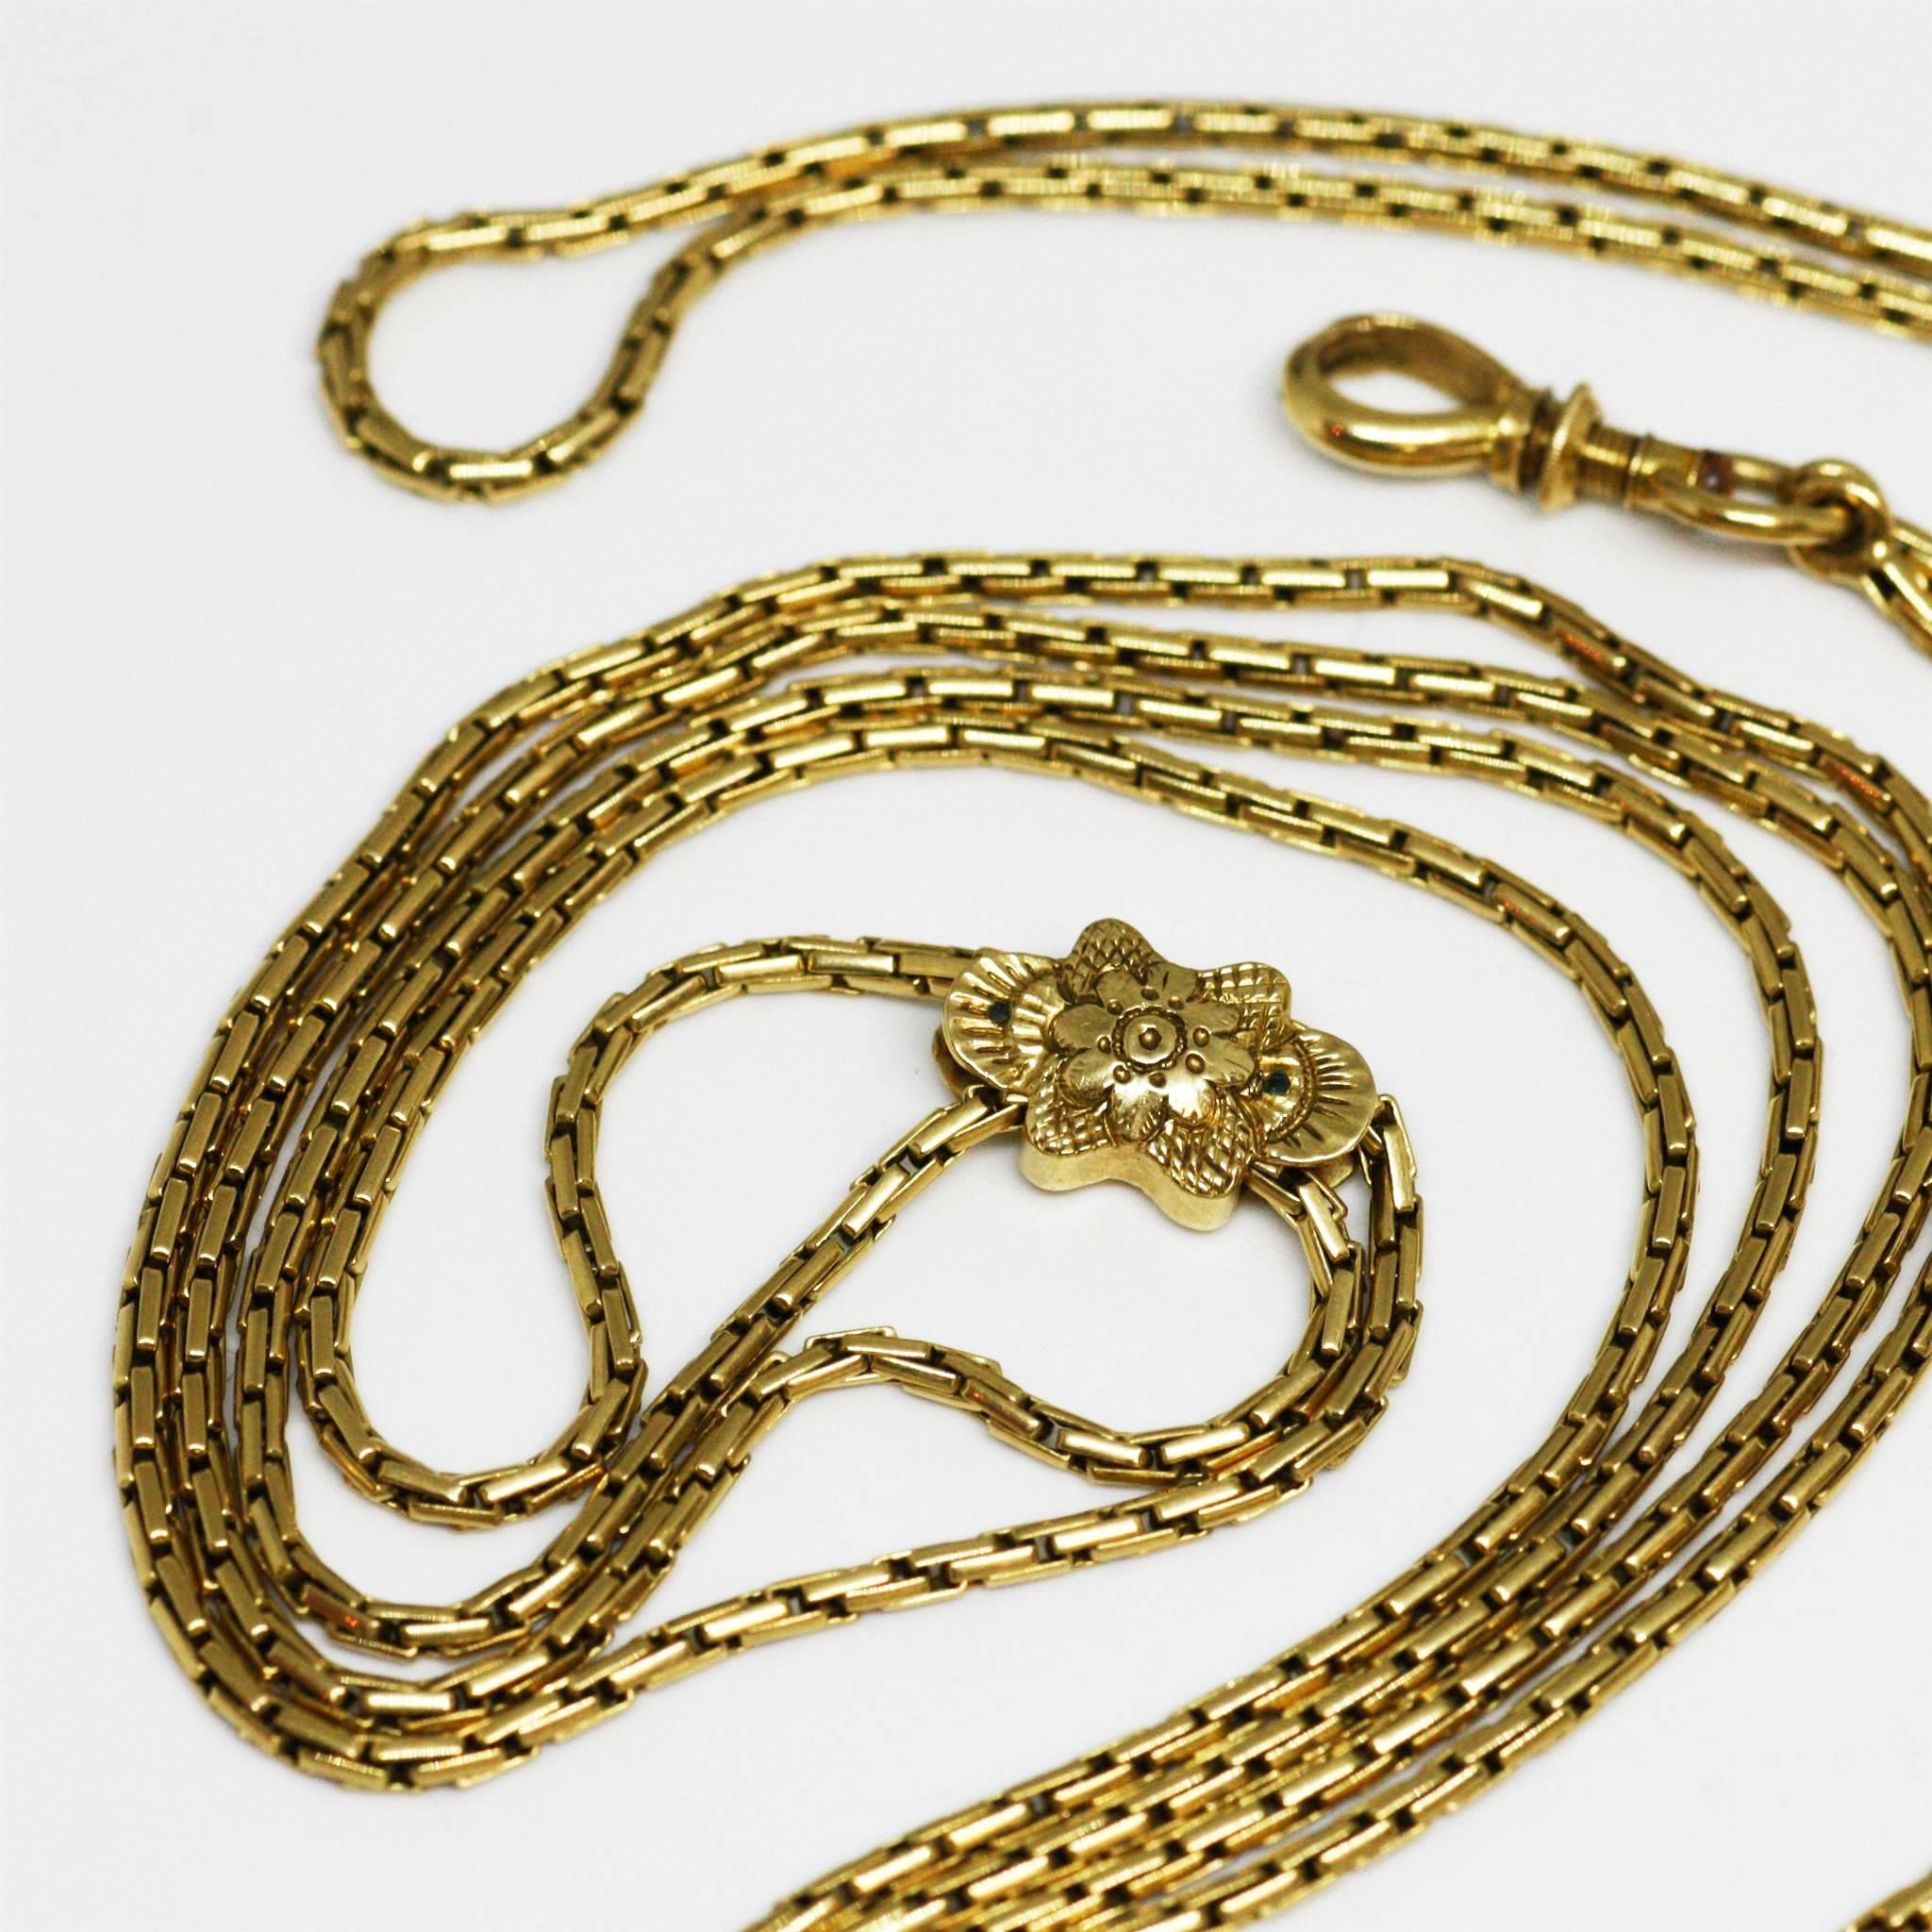 Antique yellow 18k gold long chain of a rare model. It has a movable slide decorated with a floral pattern and a security clasp. 
Perfect condition.
French (hallmark : eagle’s head), circa 1850

Length : 133.6 cms
Weight : 30.9 grs